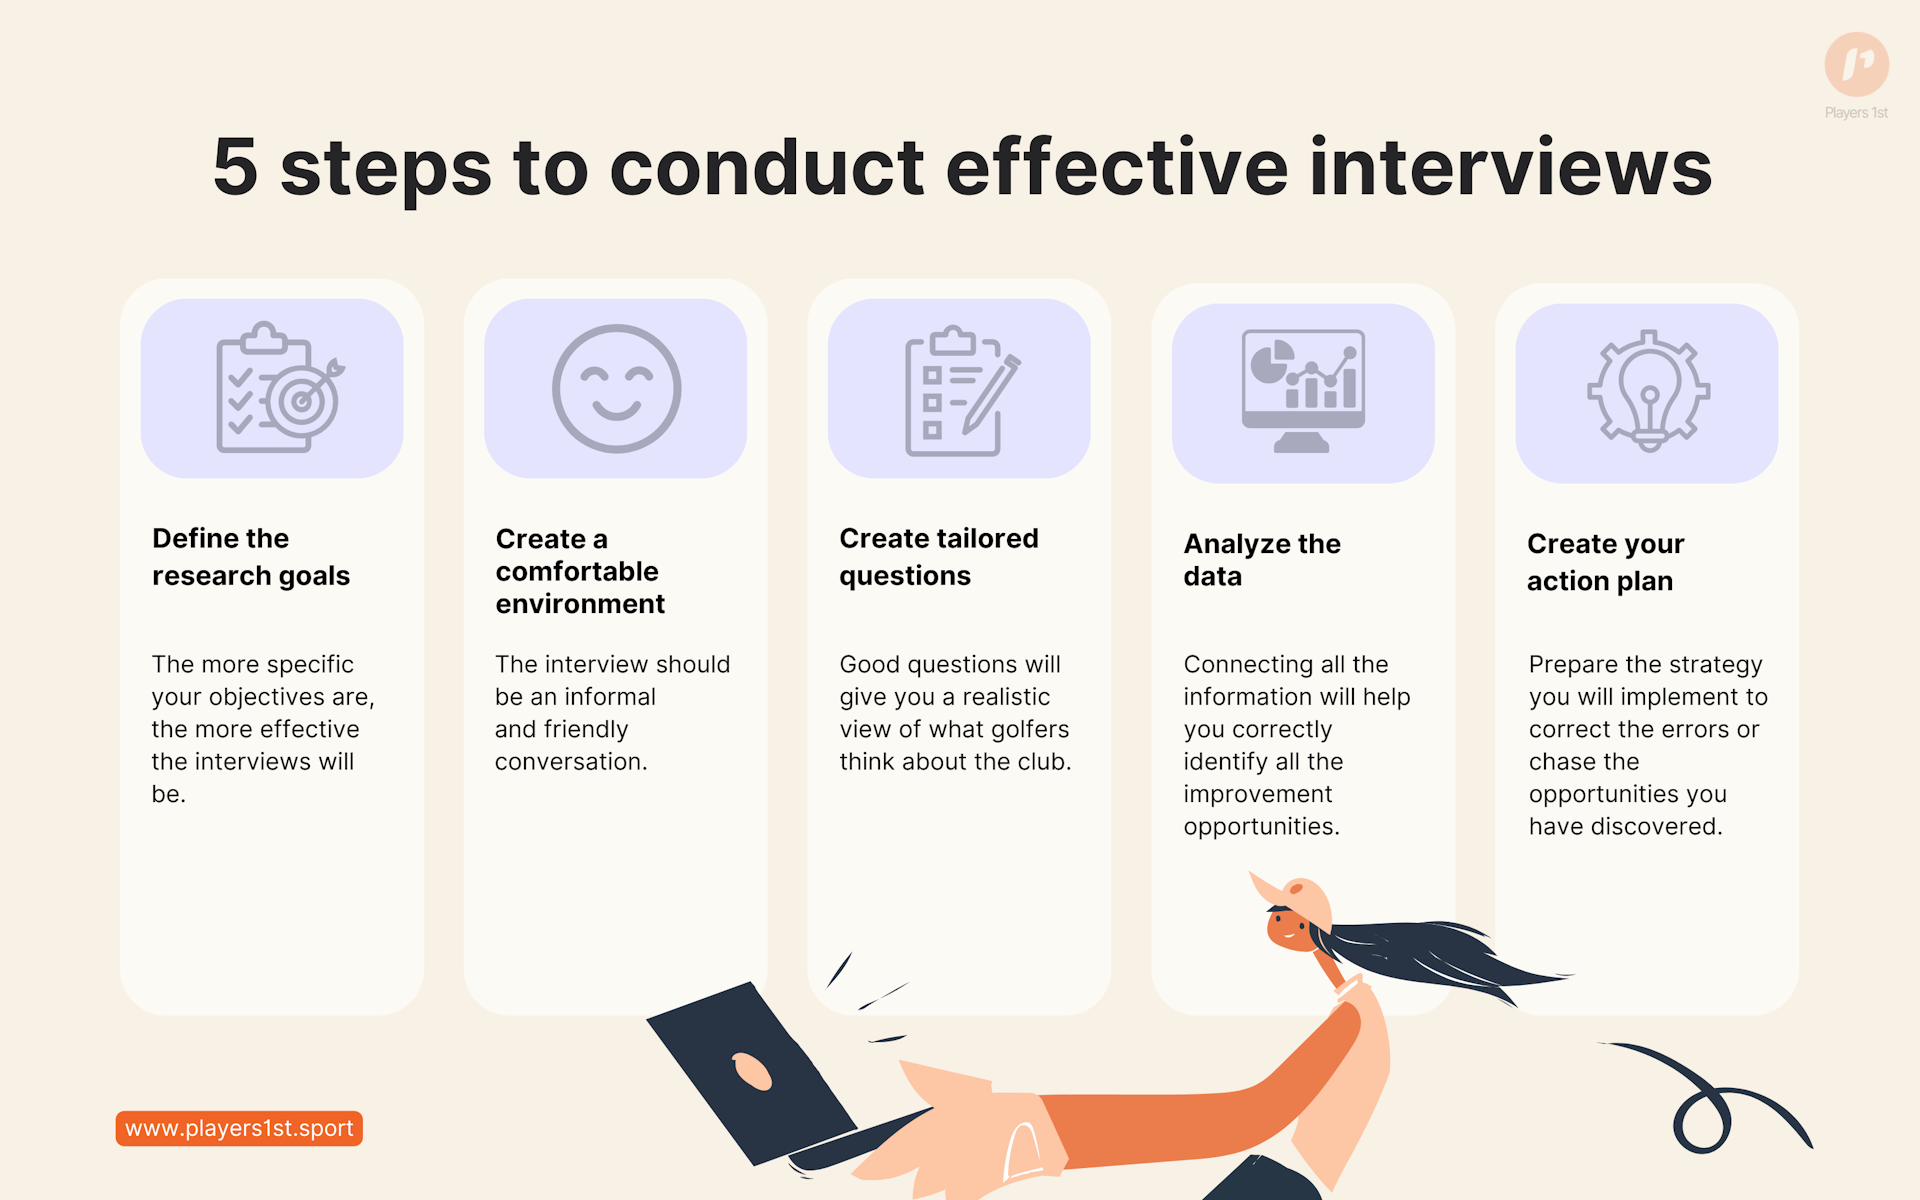 Figure 2: 5 steps to conduct effective interviews